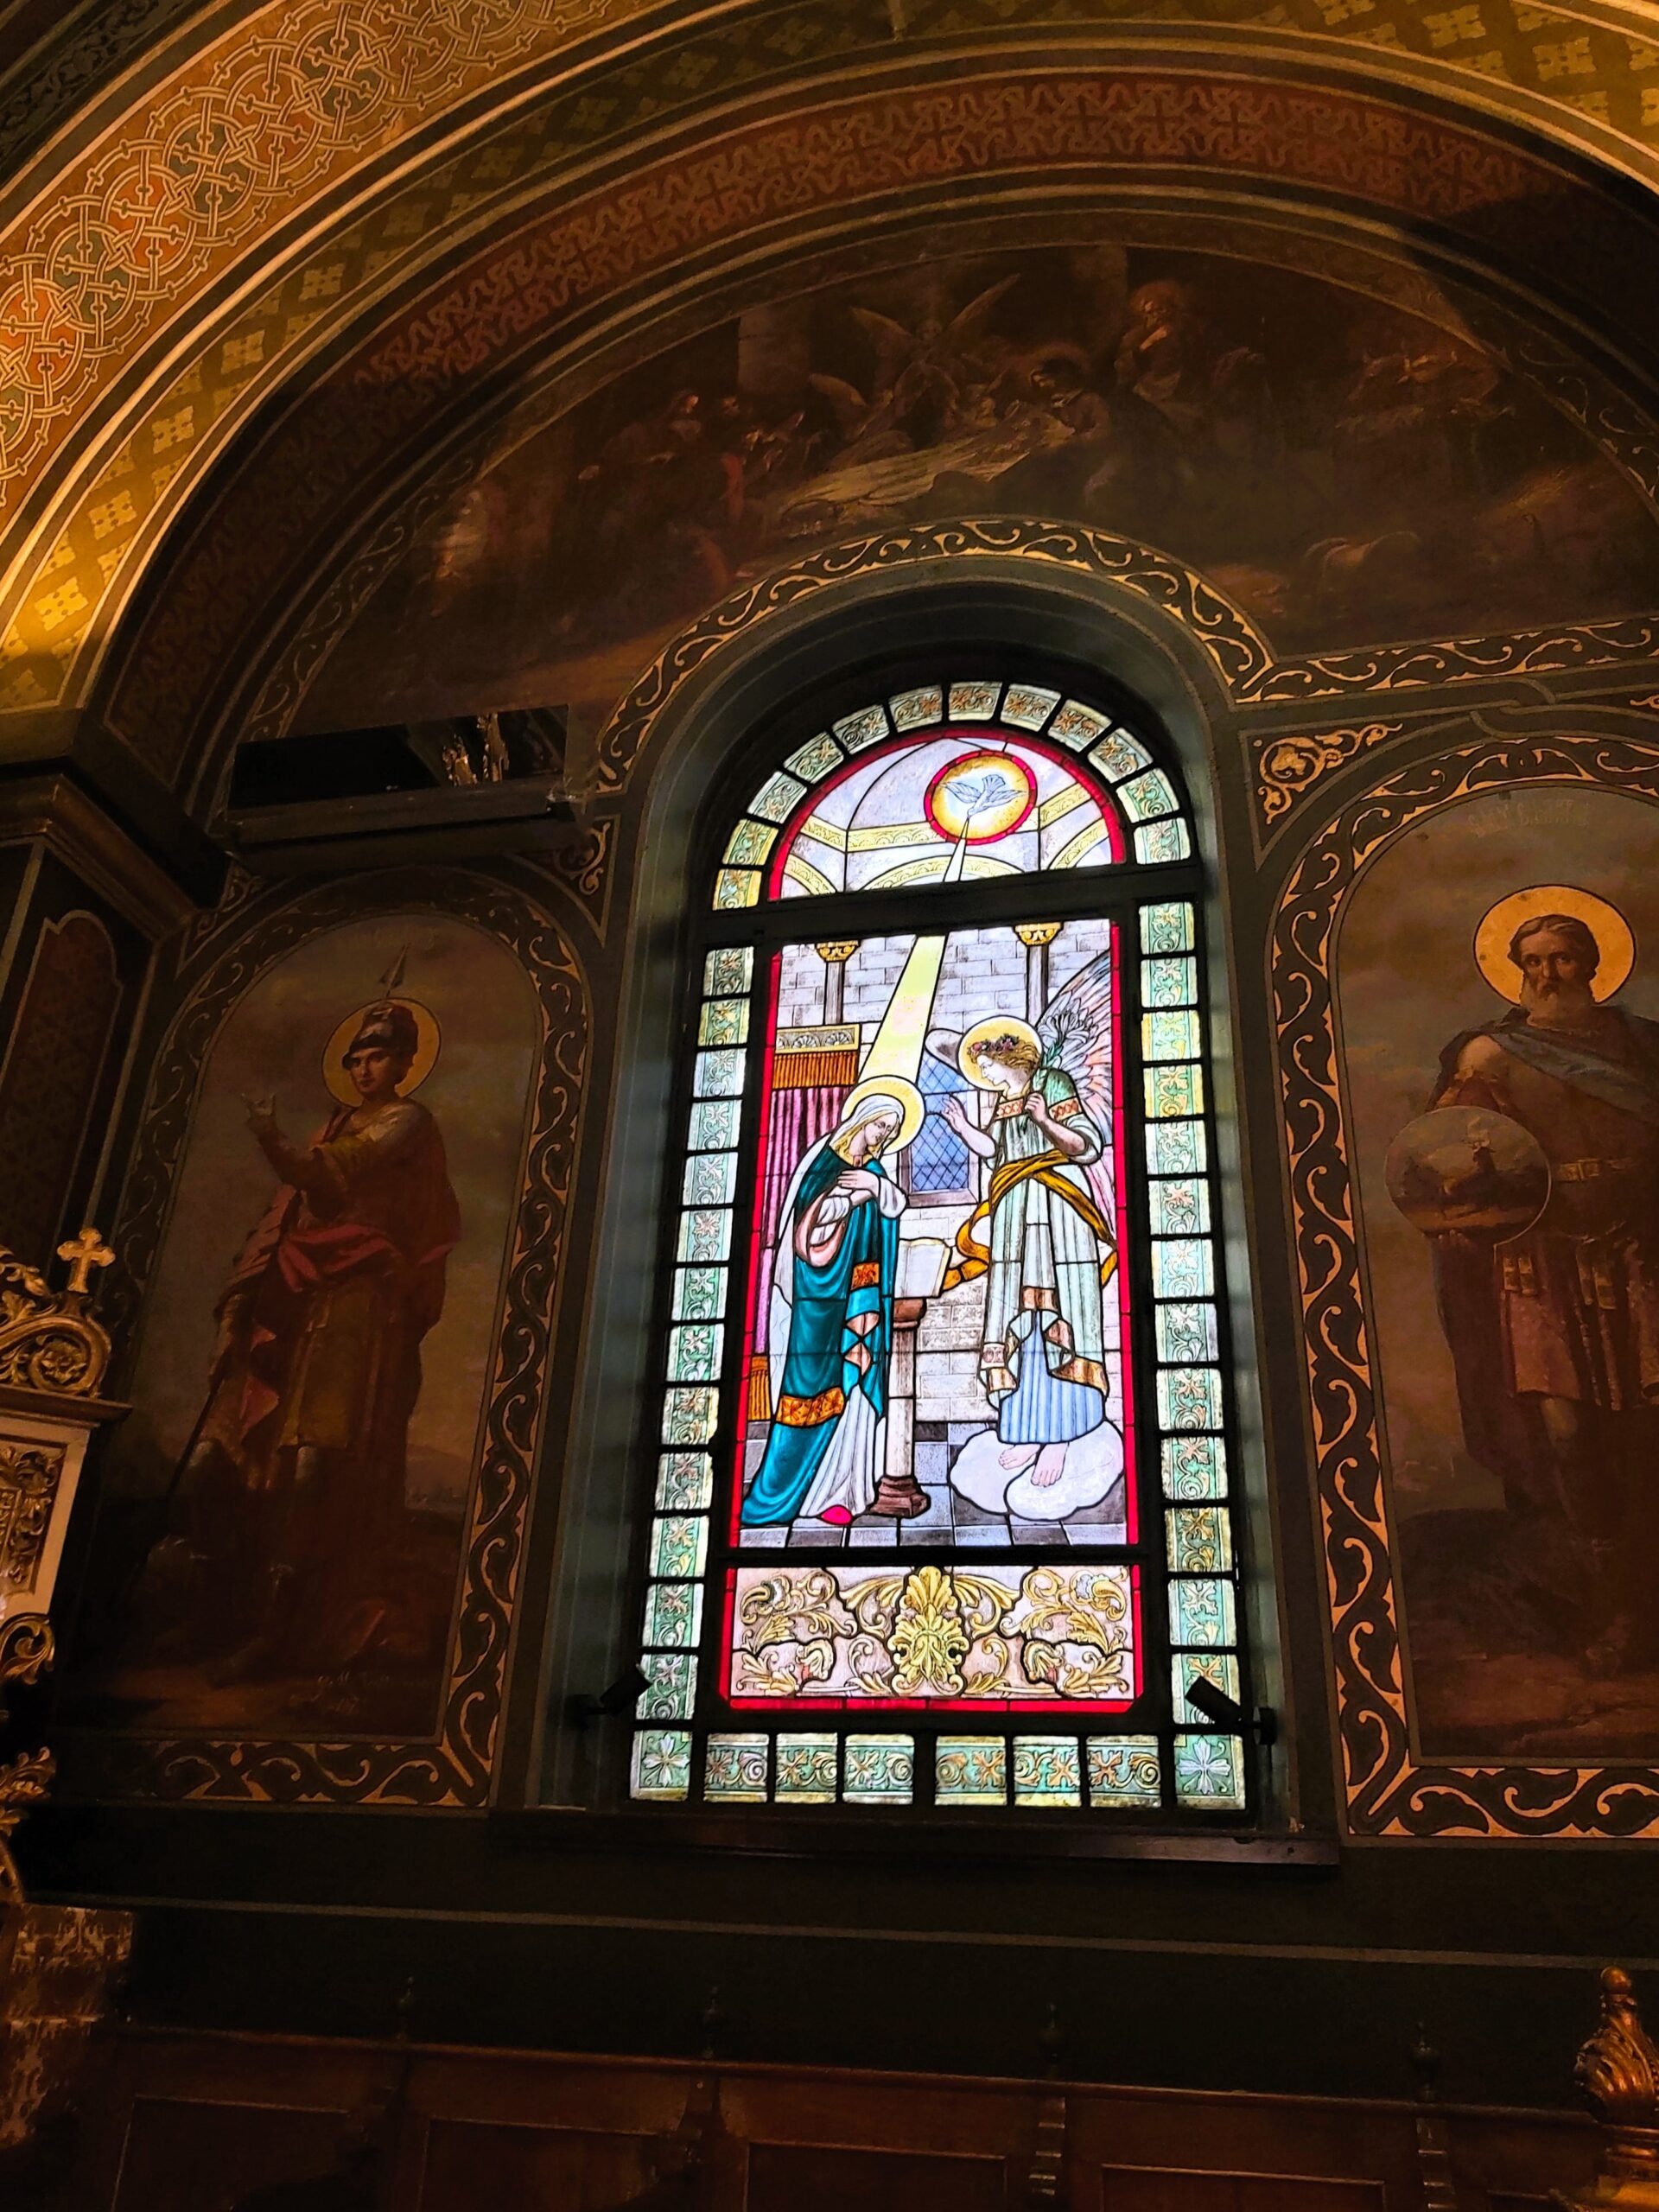 A stained glass window and paintings in a church in București, Romania